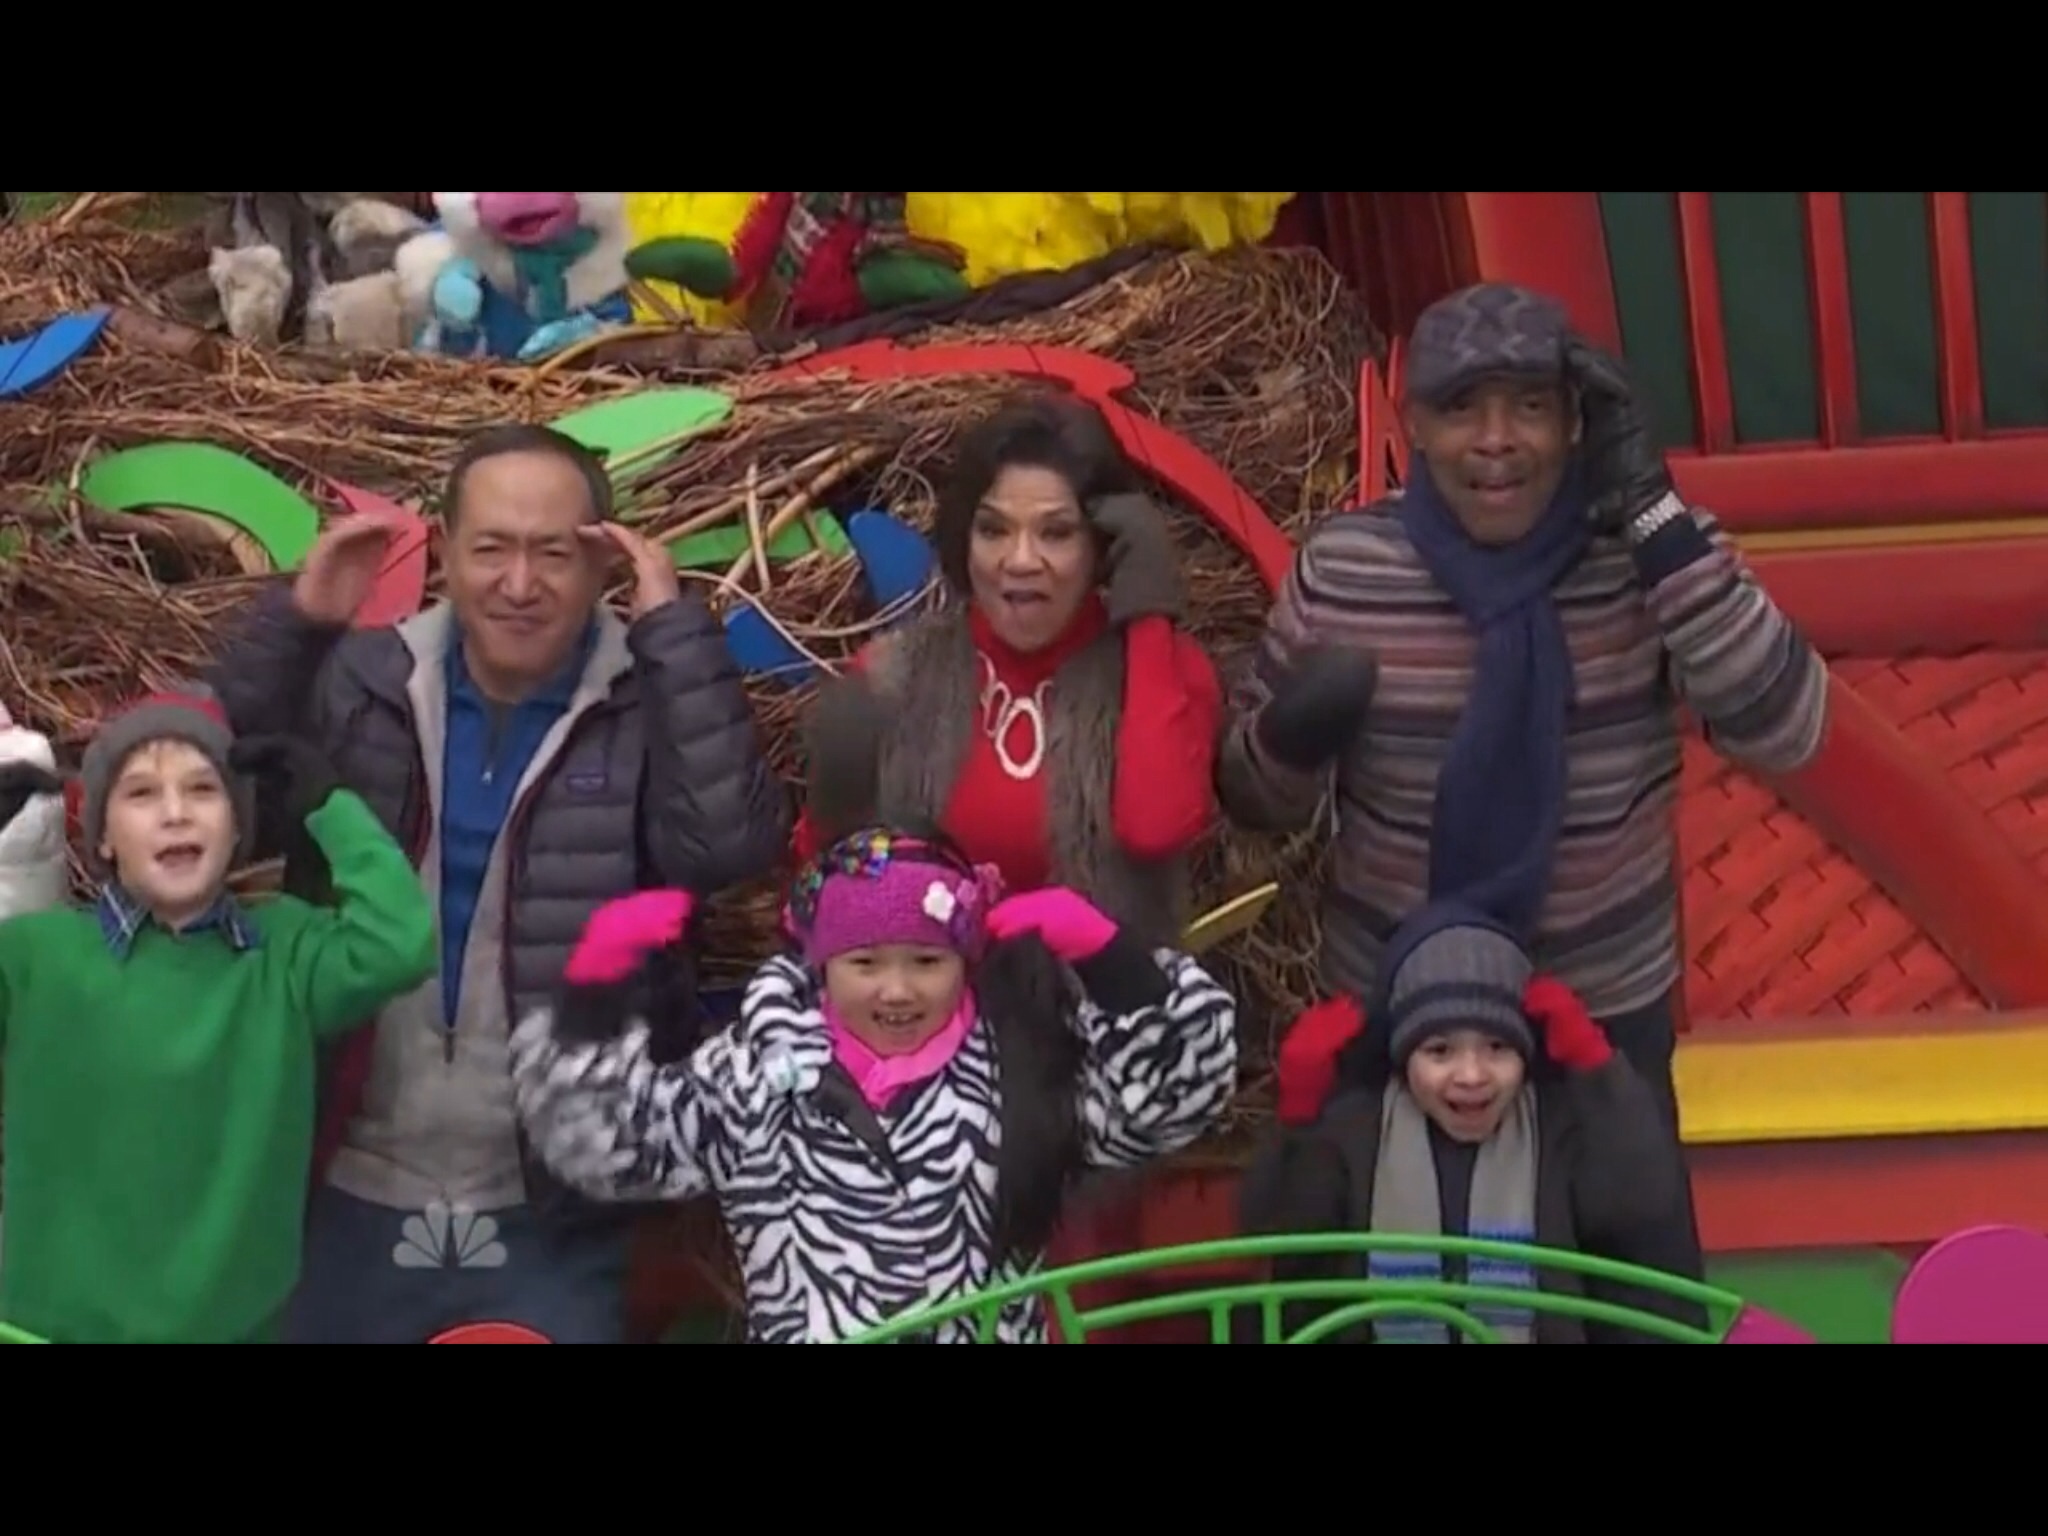 Raina Cheng & cast of Sesame Street performing on the Sesame Street float at the 88th Macy's Thanksgiving Day Parade. 2014